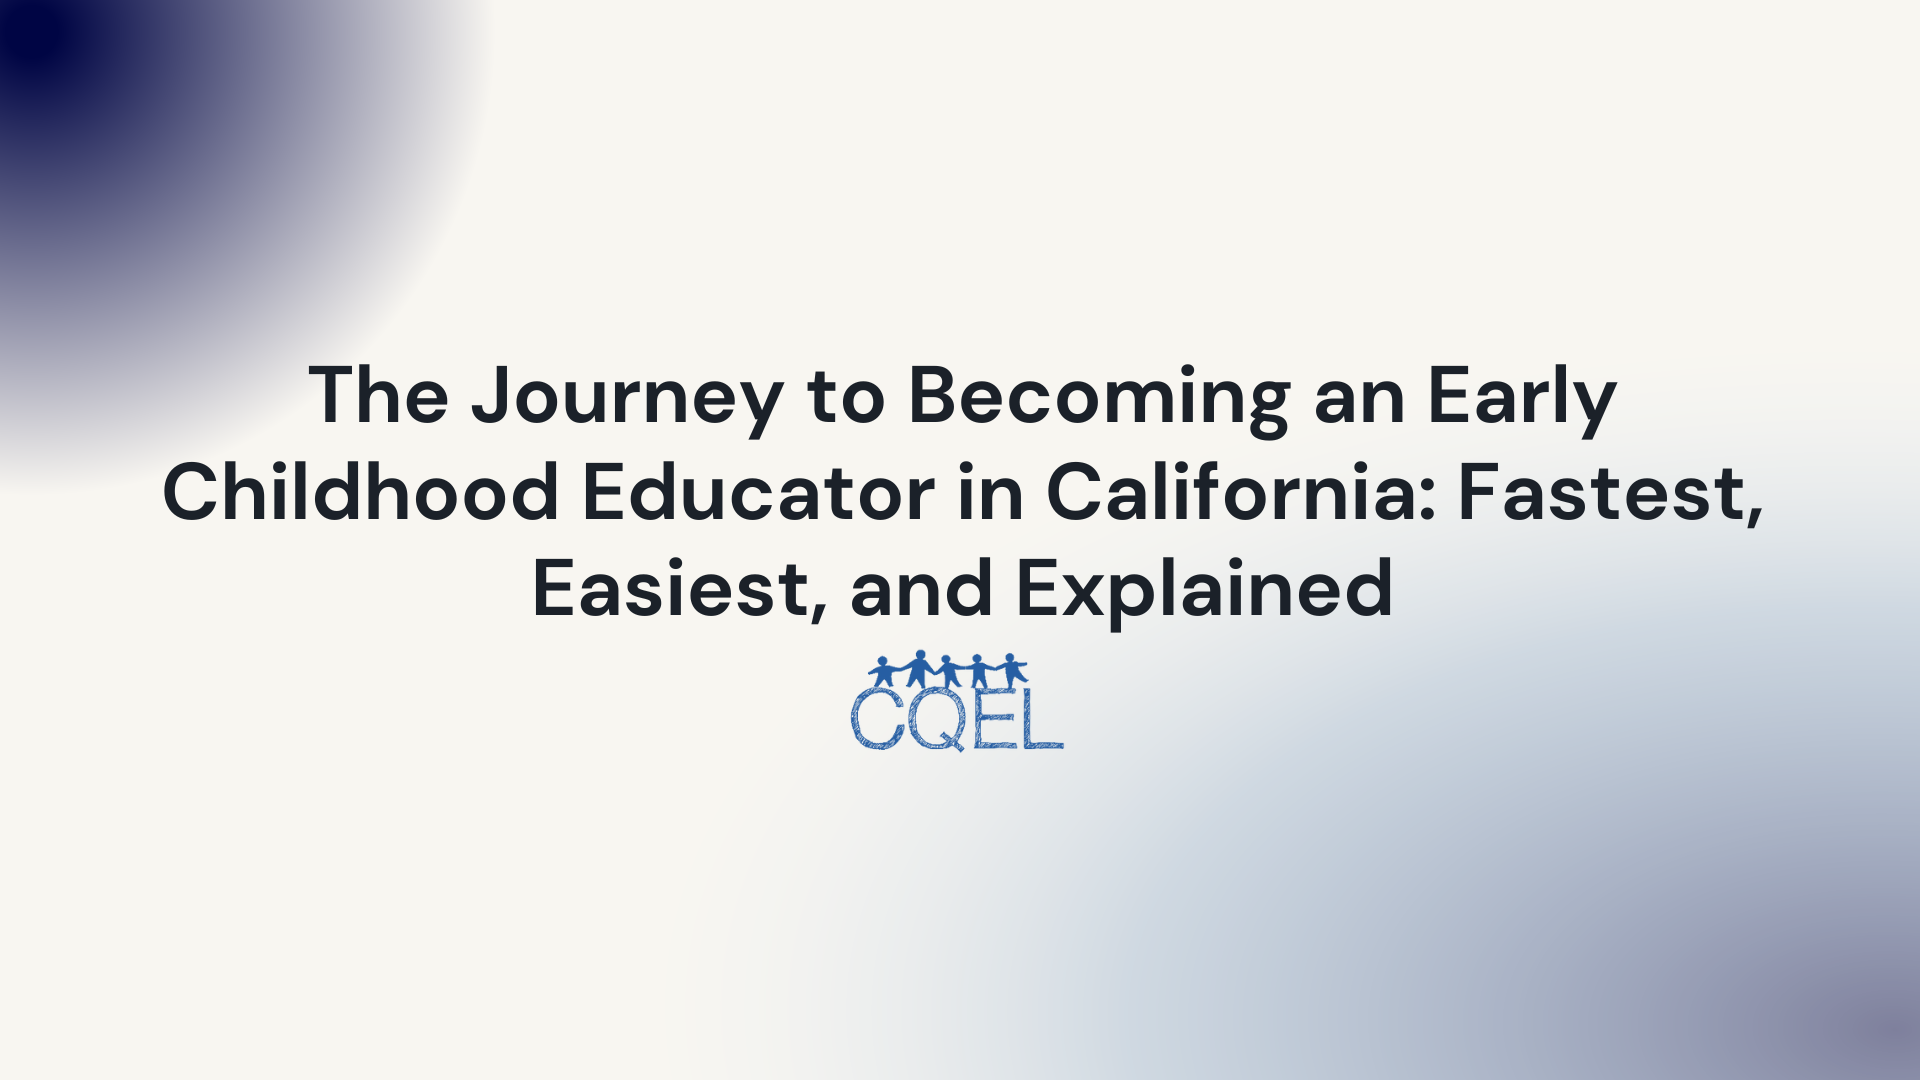 The Journey to Becoming an Early Childhood Educator in California: Fastest, Easiest, and Explained